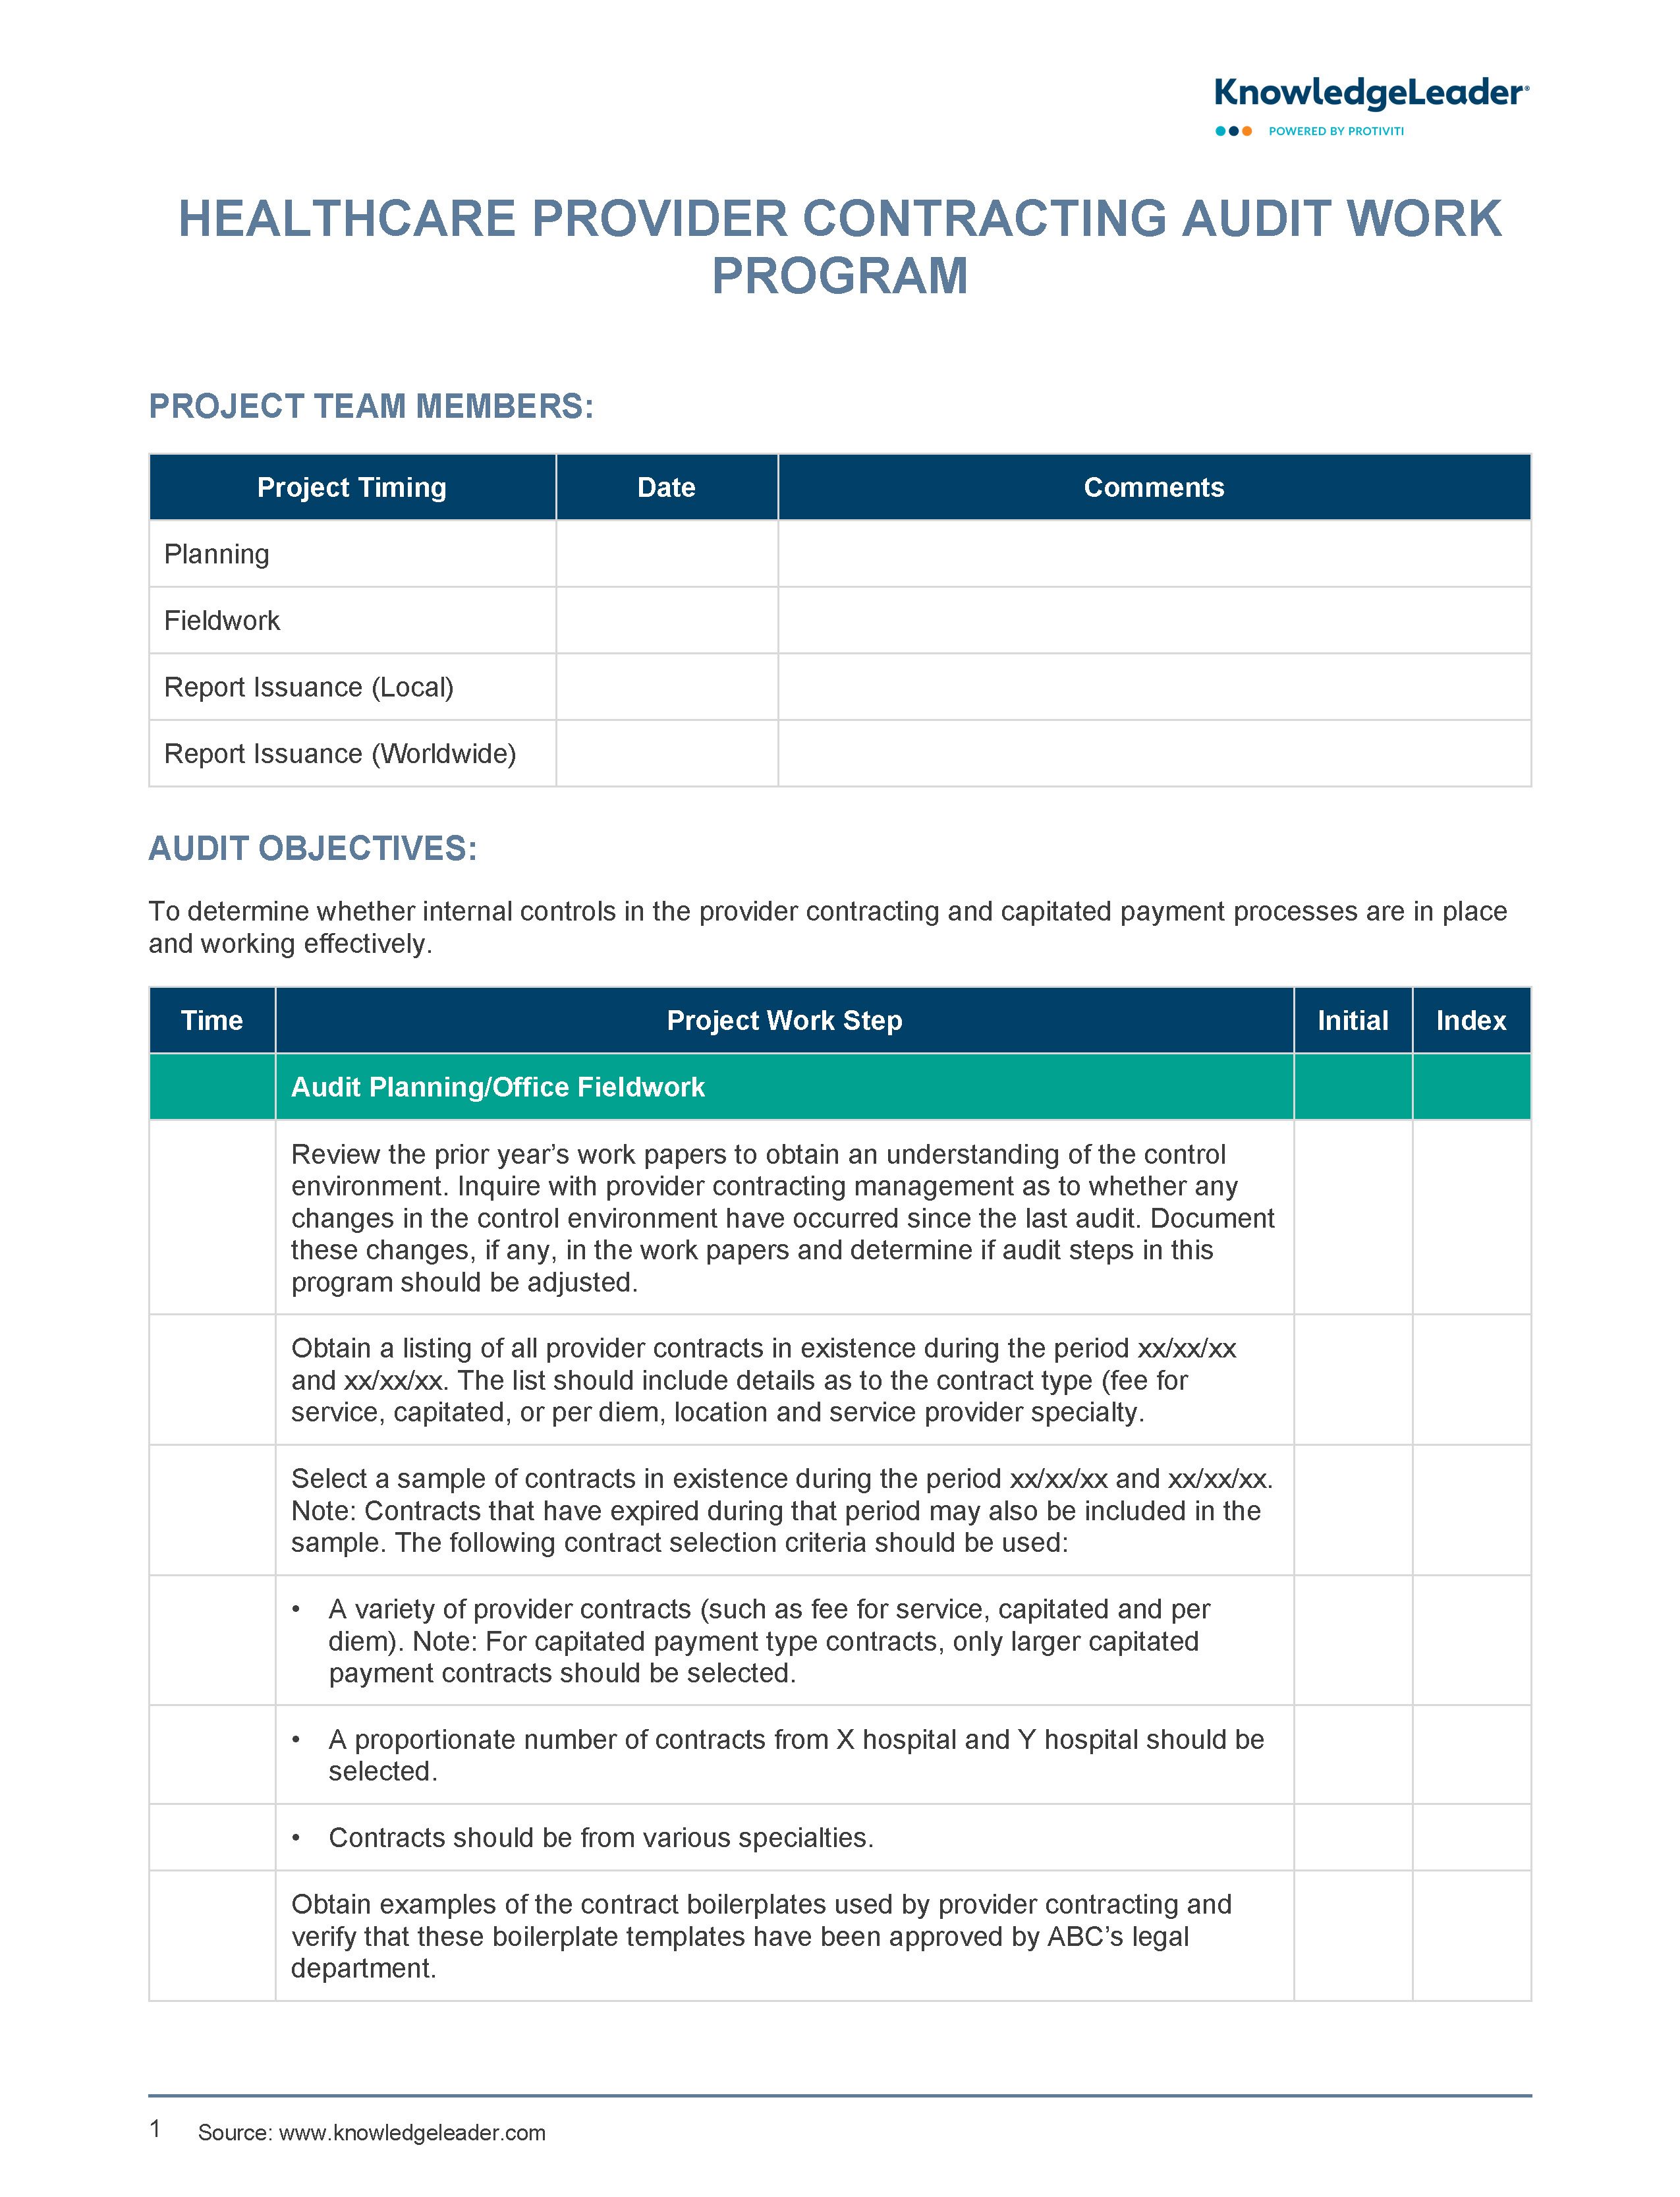 screenshot of the first page of Healthcare Provider Contracting Audit Work Program